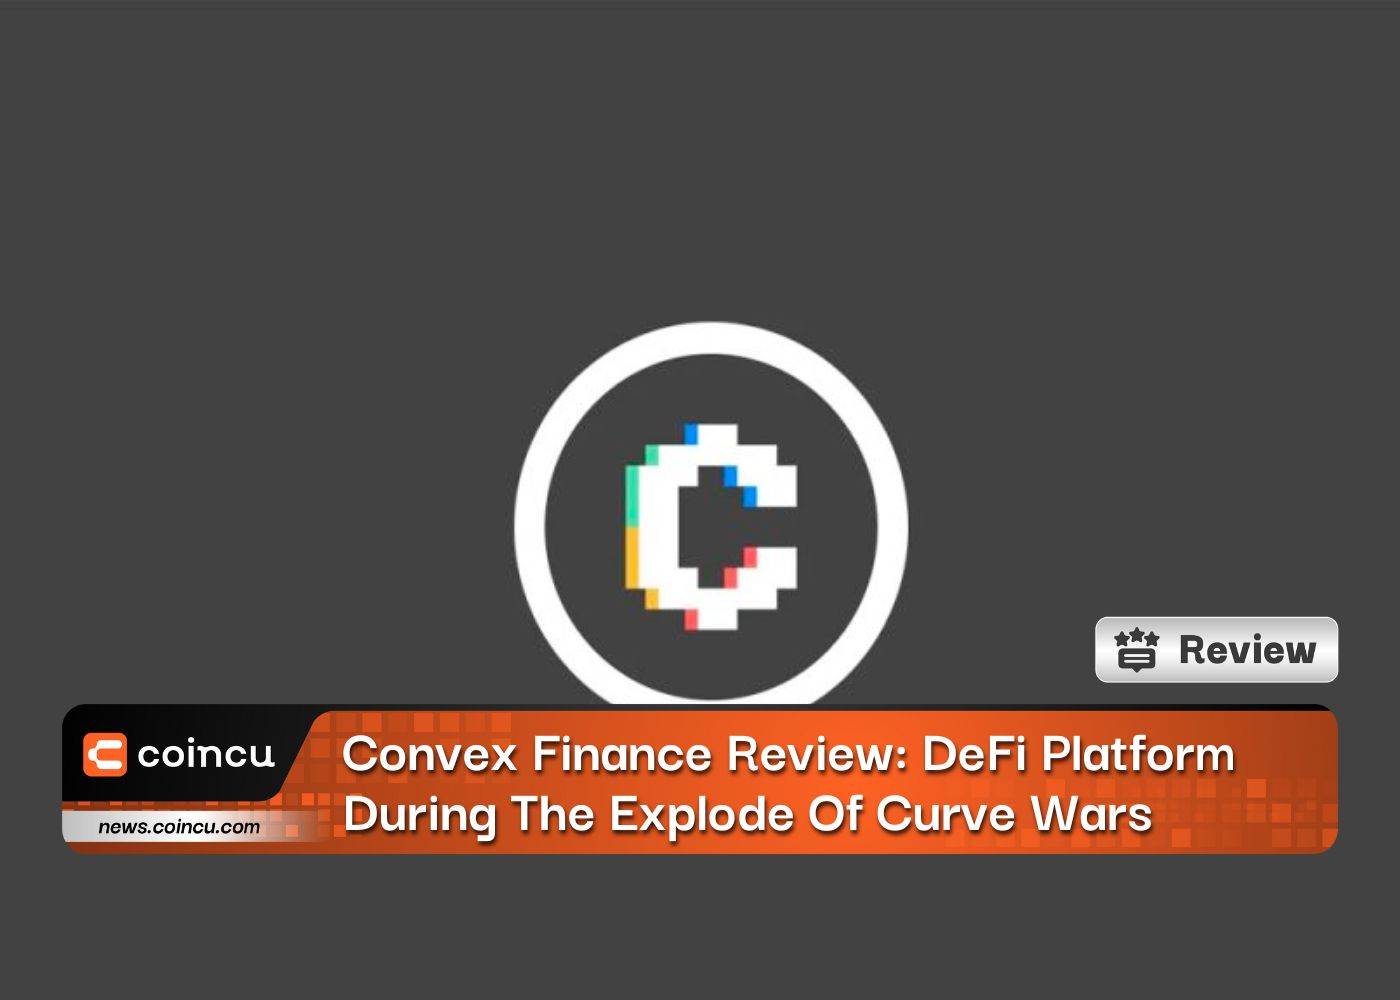 Convex Finance Review: DeFi Platform During The Explode Of Curve Wars